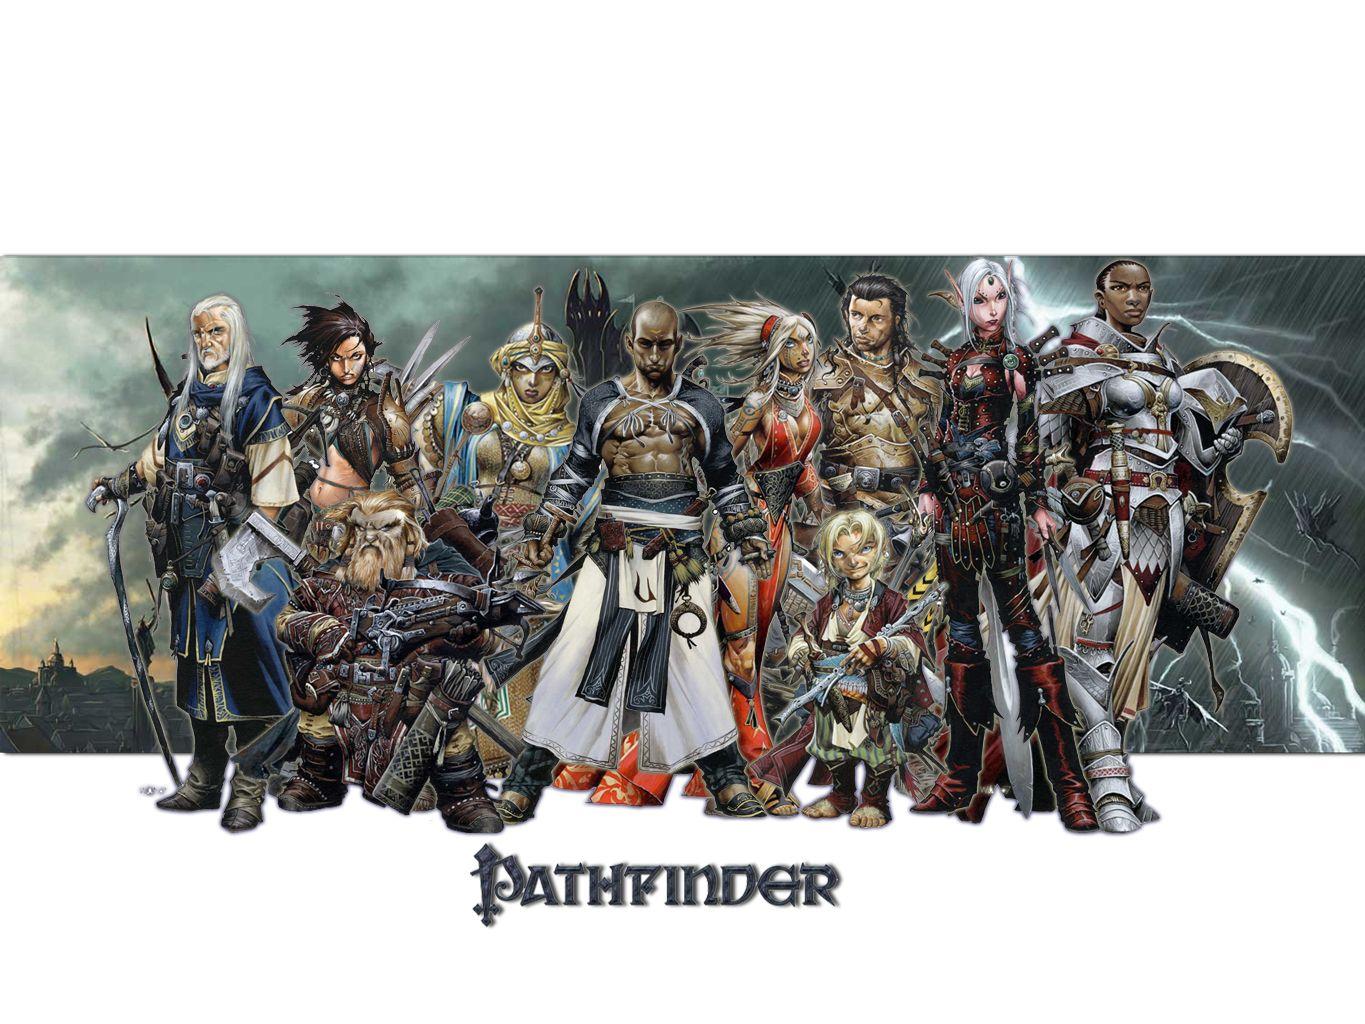 Pathfinder Wallpaper, Awesome Picture. Pathfinder Full